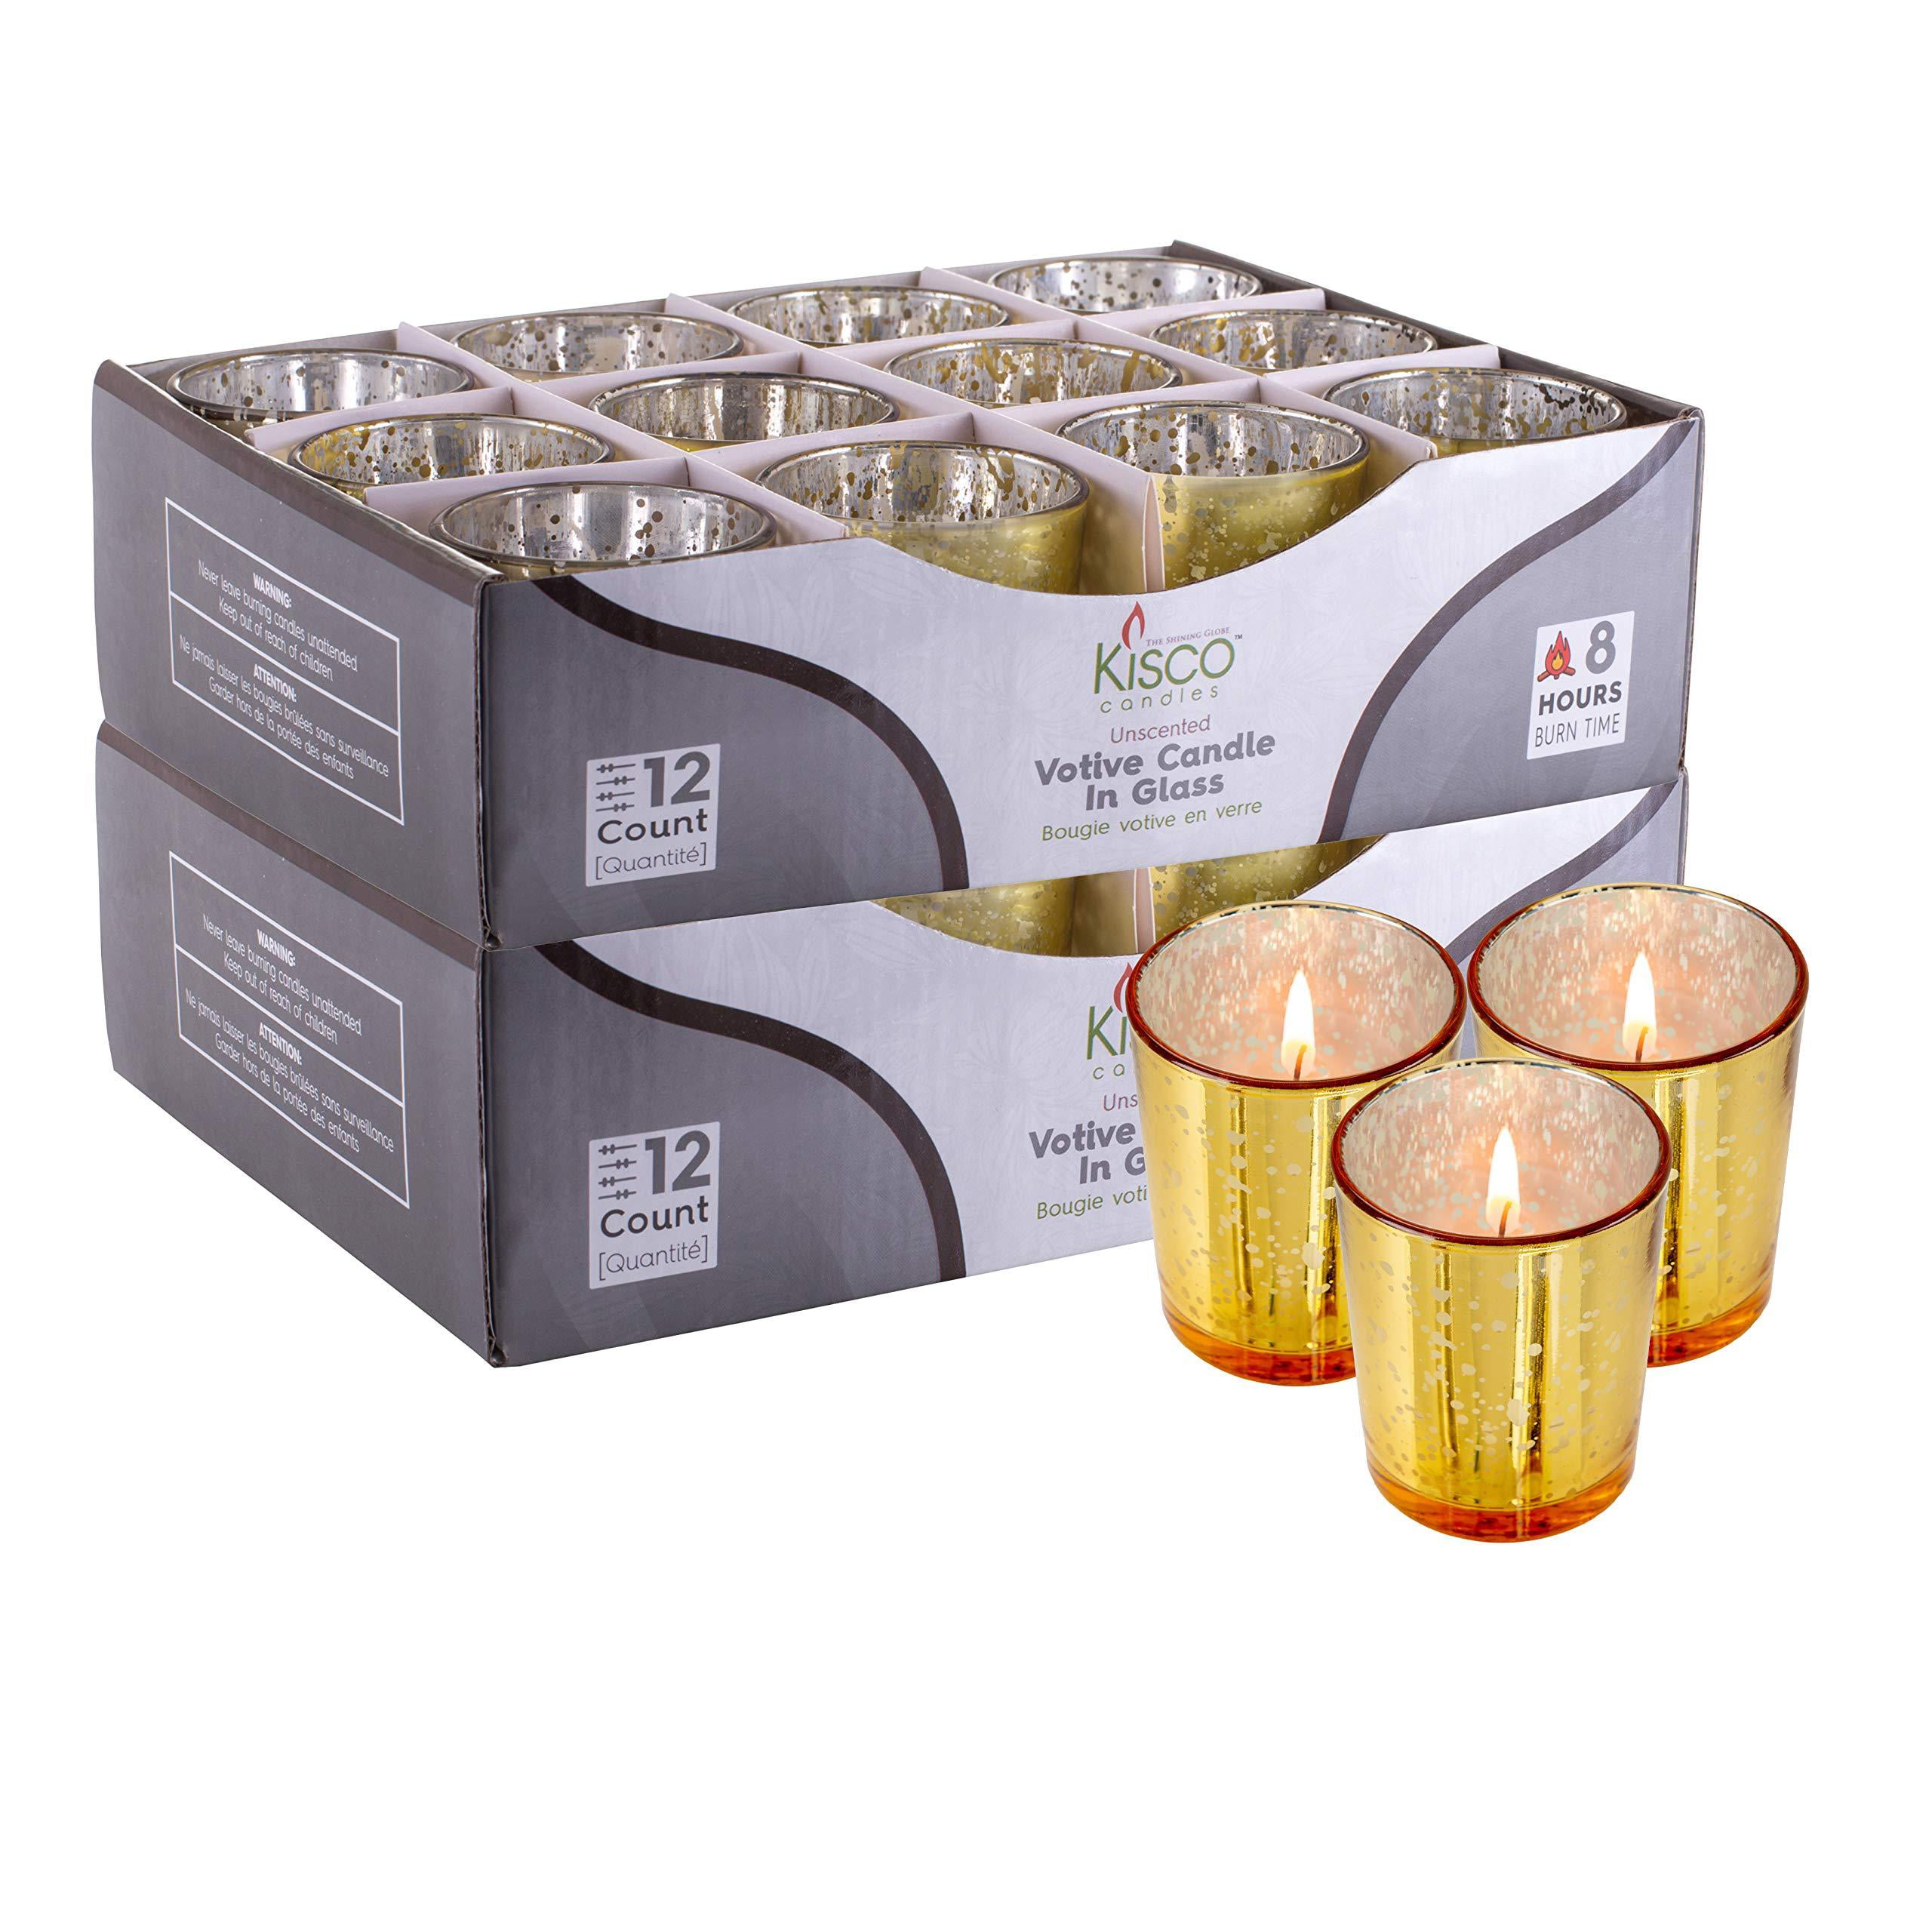 Beautiful Living Room Bathroom Lighting Kitchen Long-Lasting Wax KISCO CANDLES Votive Candles with Holders 12-Pack 8 Hour Gold Decorative Glass Home Decor